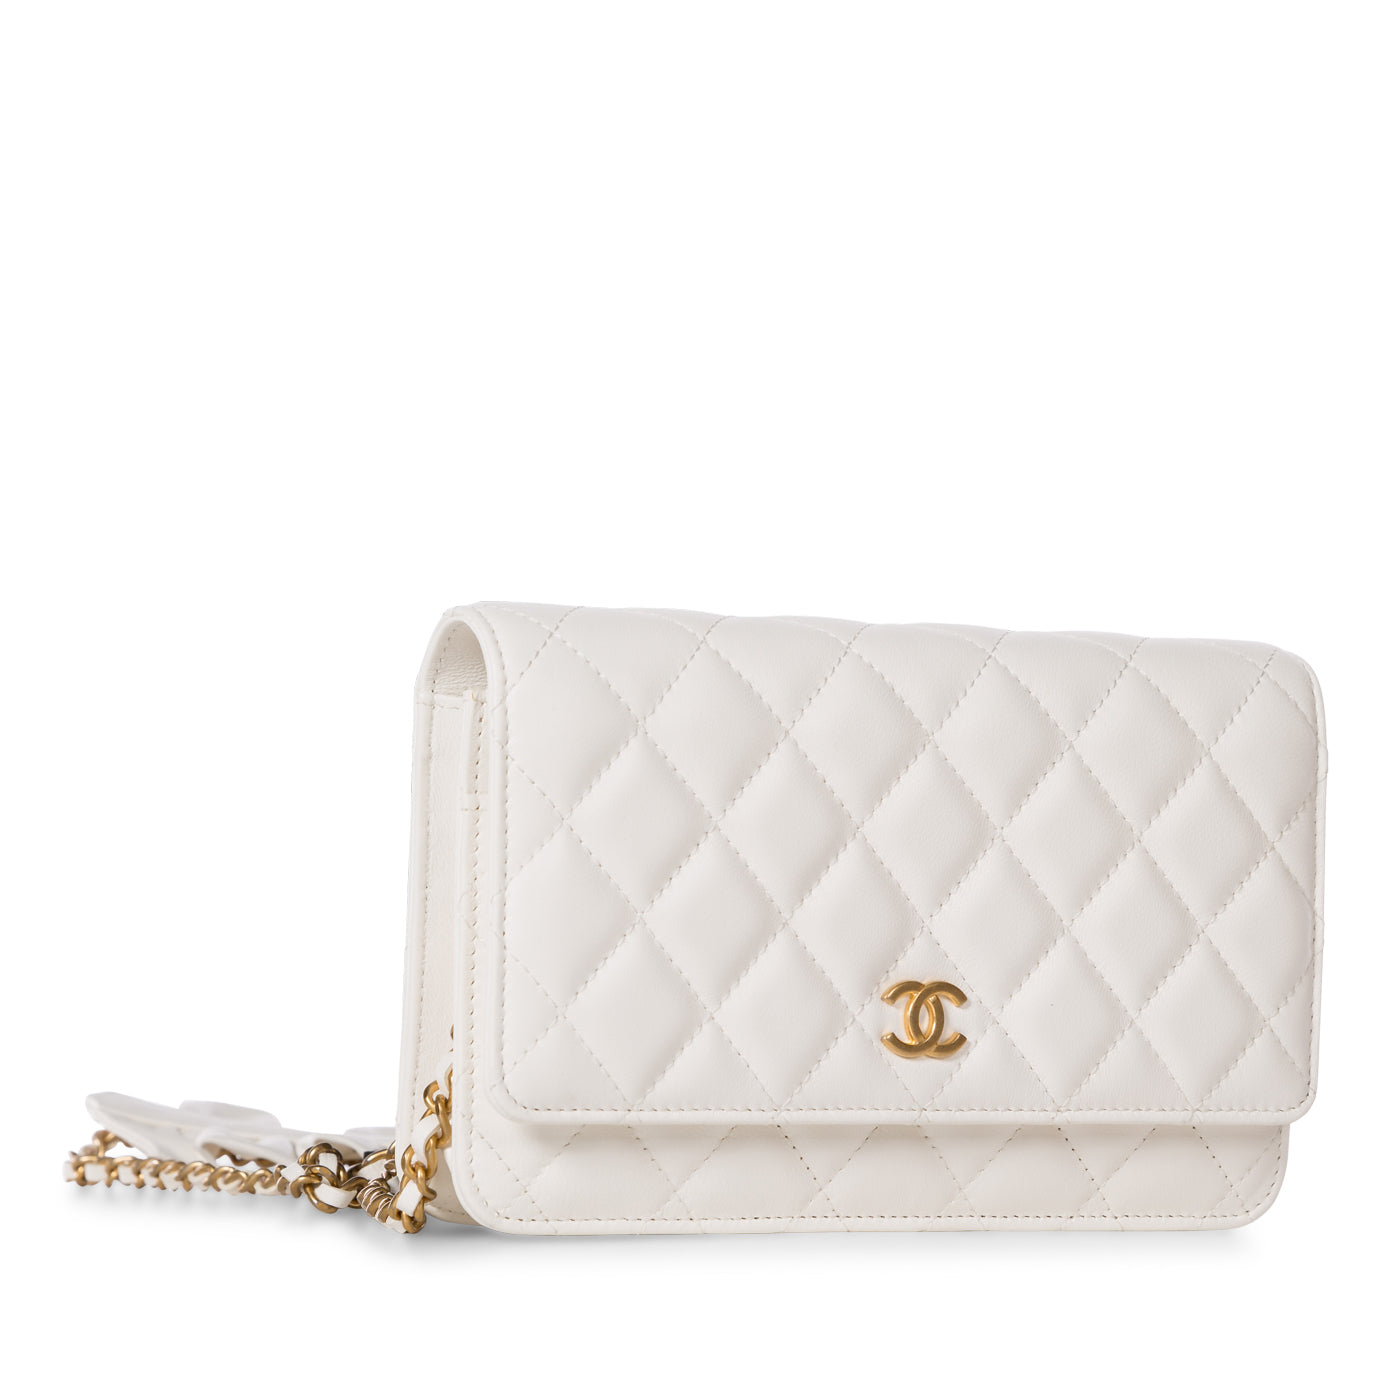 Chanel - WOC - Lambskin - White - AGHW - Fringed Leather Shoulder